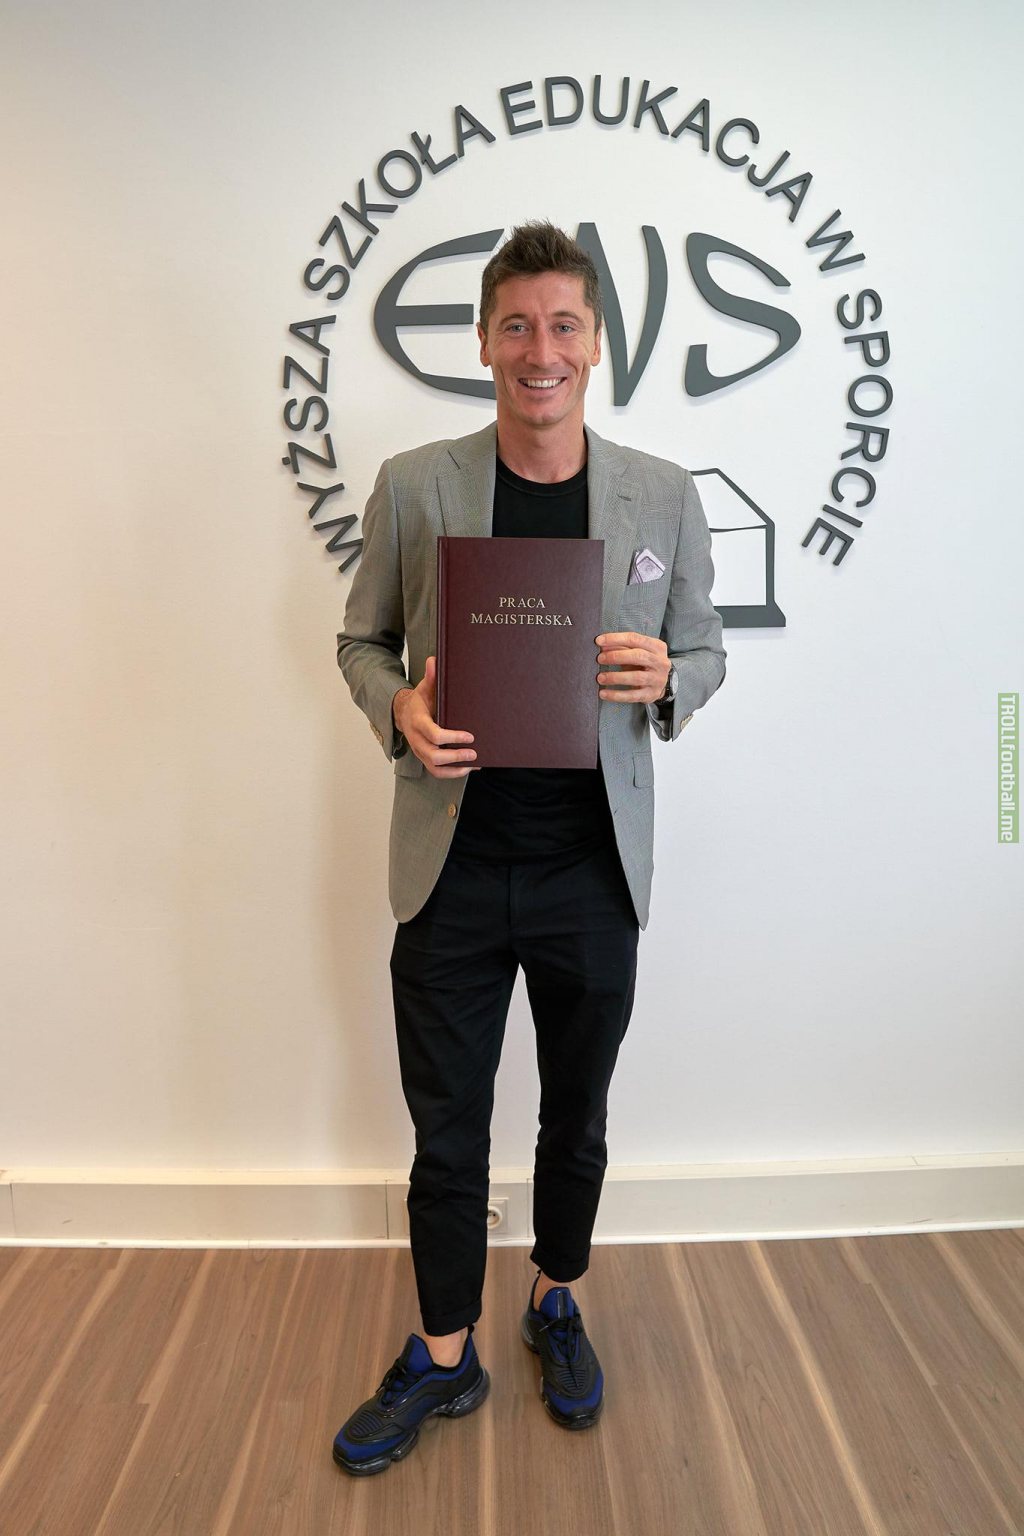 Today Robert Lewandowski graduated with distinction master's degree in Sports education. Three years ago he completed his undergraduate studies.